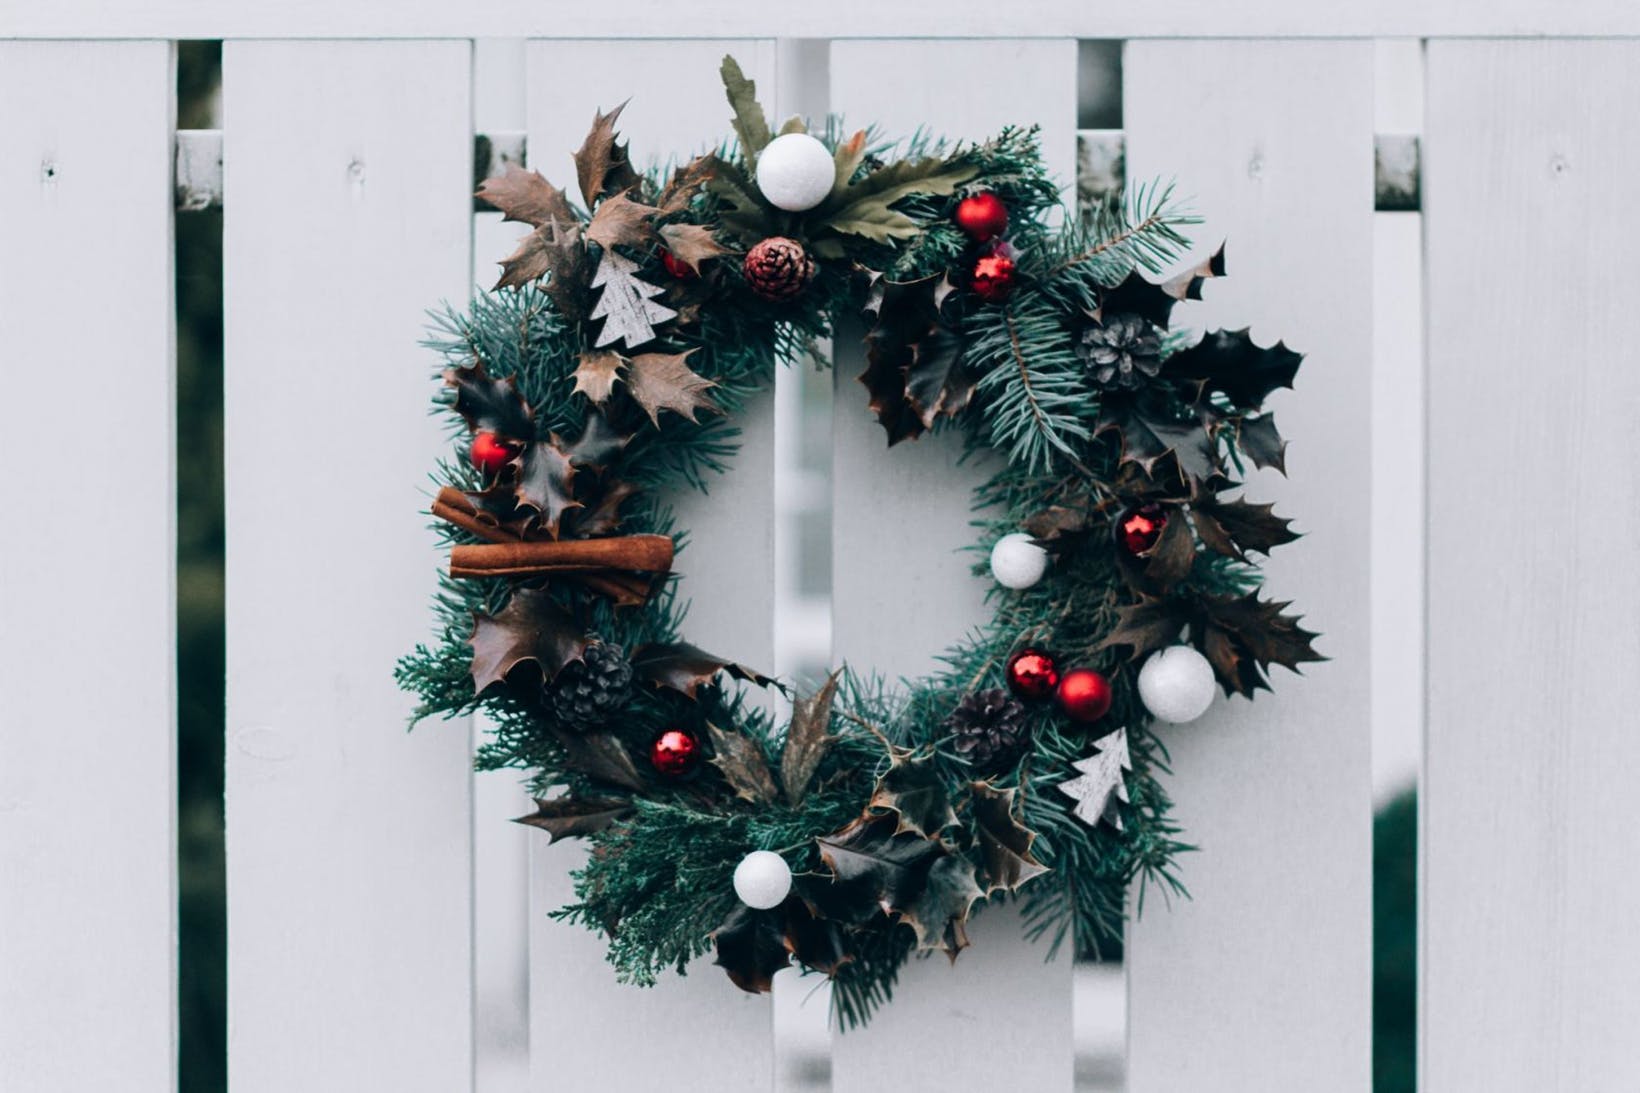 How to make your own Christmas wreath at home: top tips from florists